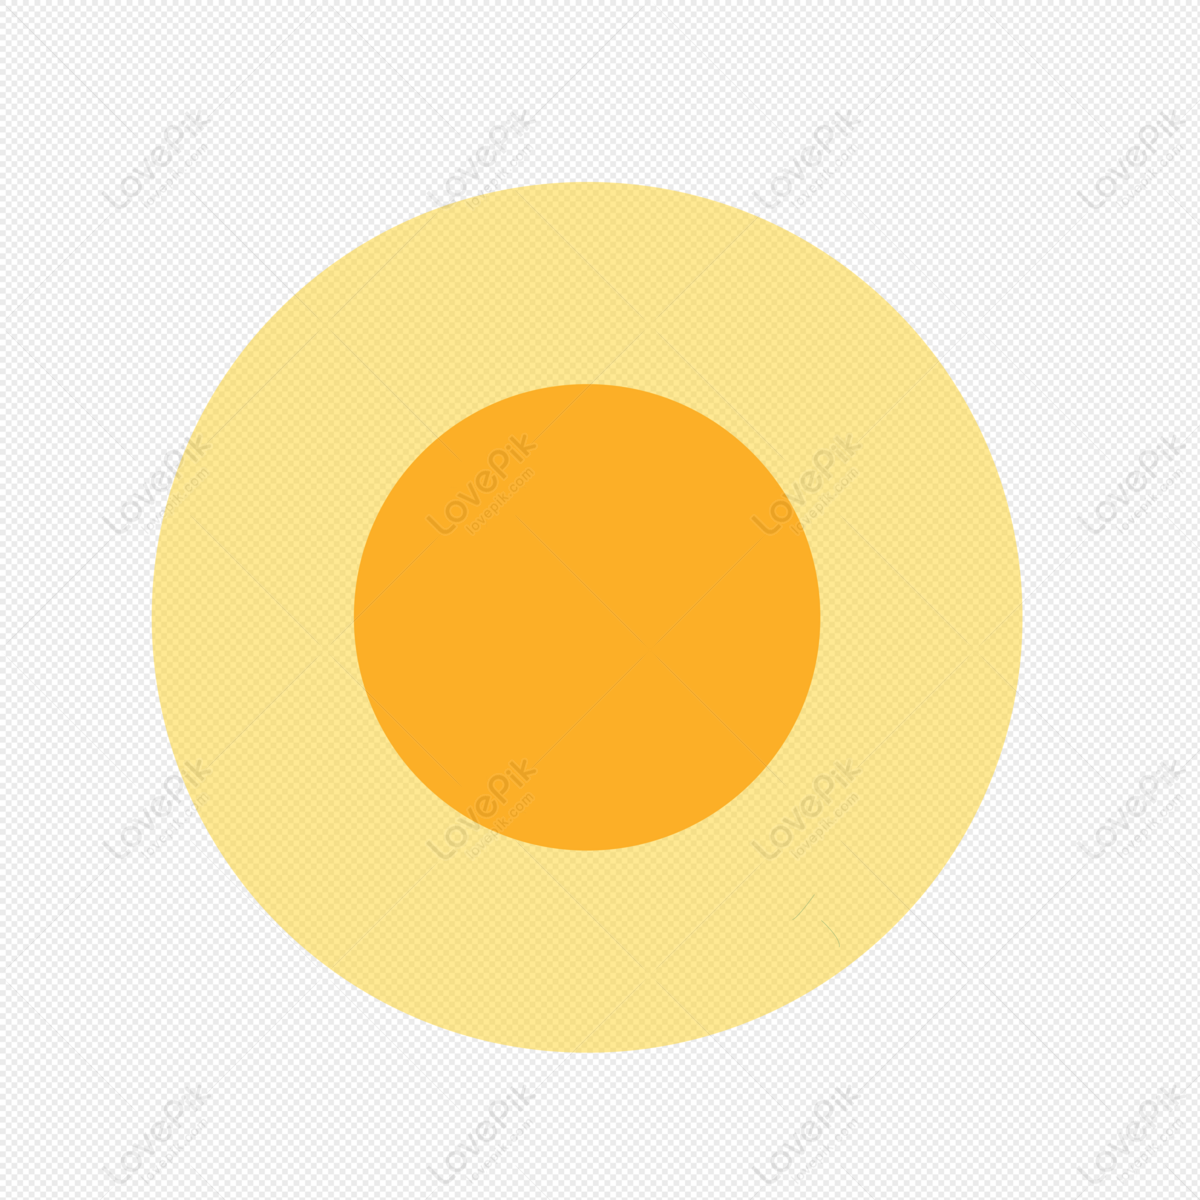 Yellow Circle PNG Transparent Background And Clipart Image For Free  Download - Lovepik | 401709380